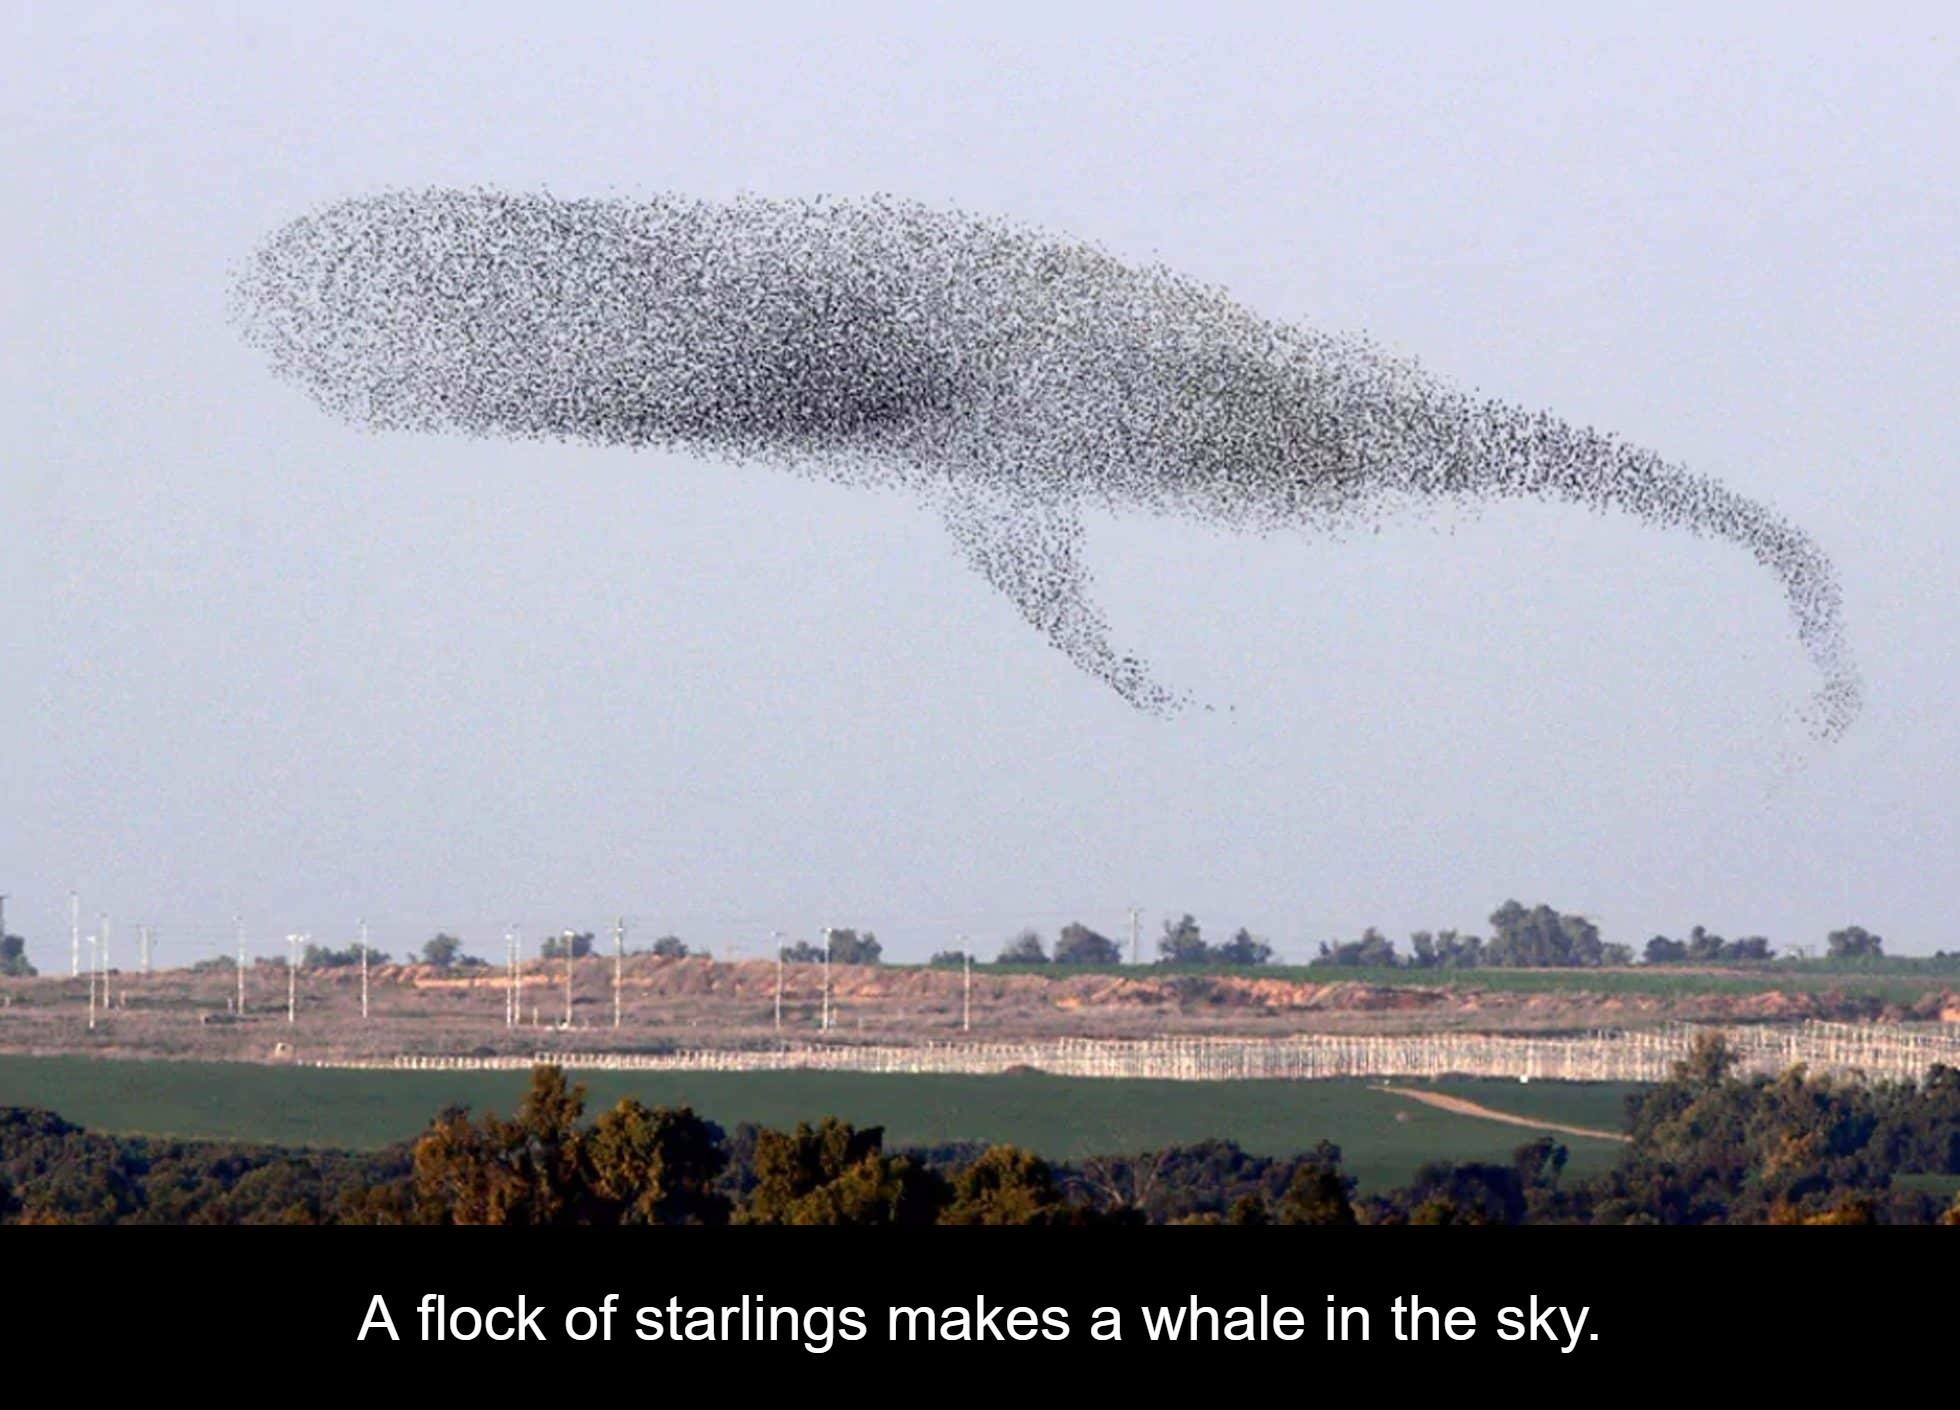 Funny meme of a flock of starlings that make the shape of a whale in the sky.